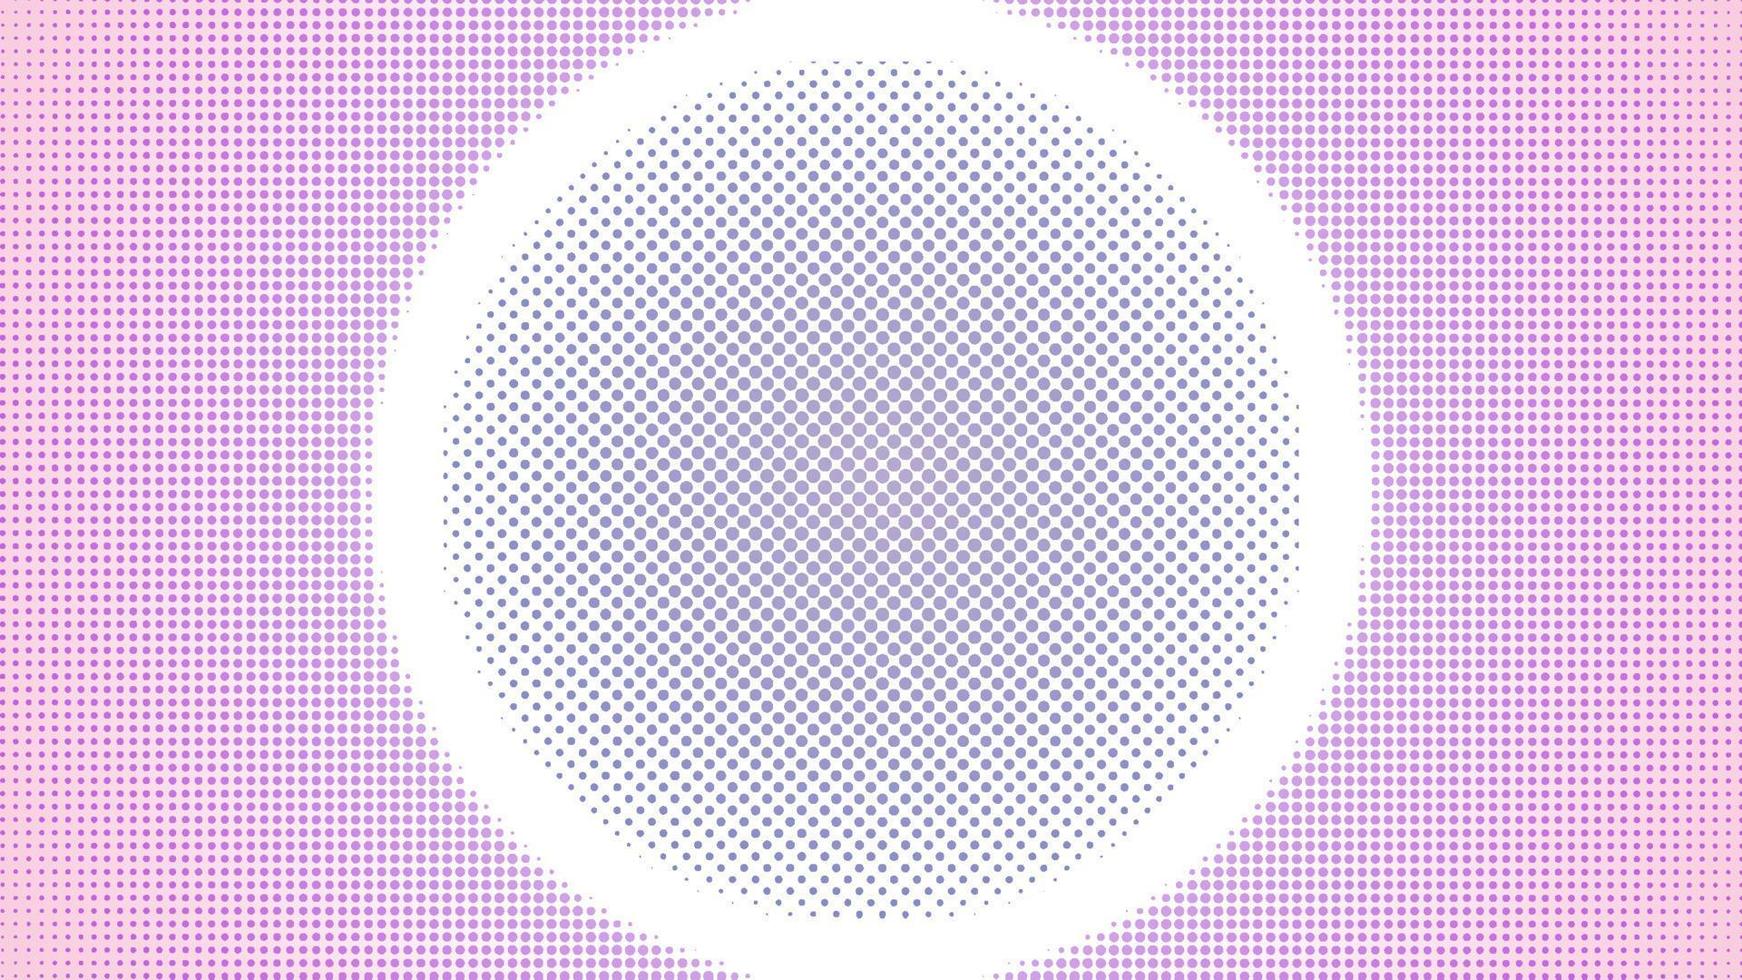 Halftone Background Design Template with Big Ellipse Shape Element, Abstract Dots Pattern Illustration, Retro Texture, Pink Violet Gradient, Romantic Color, Valentine Day, Polka-dotted, polkadot, vector